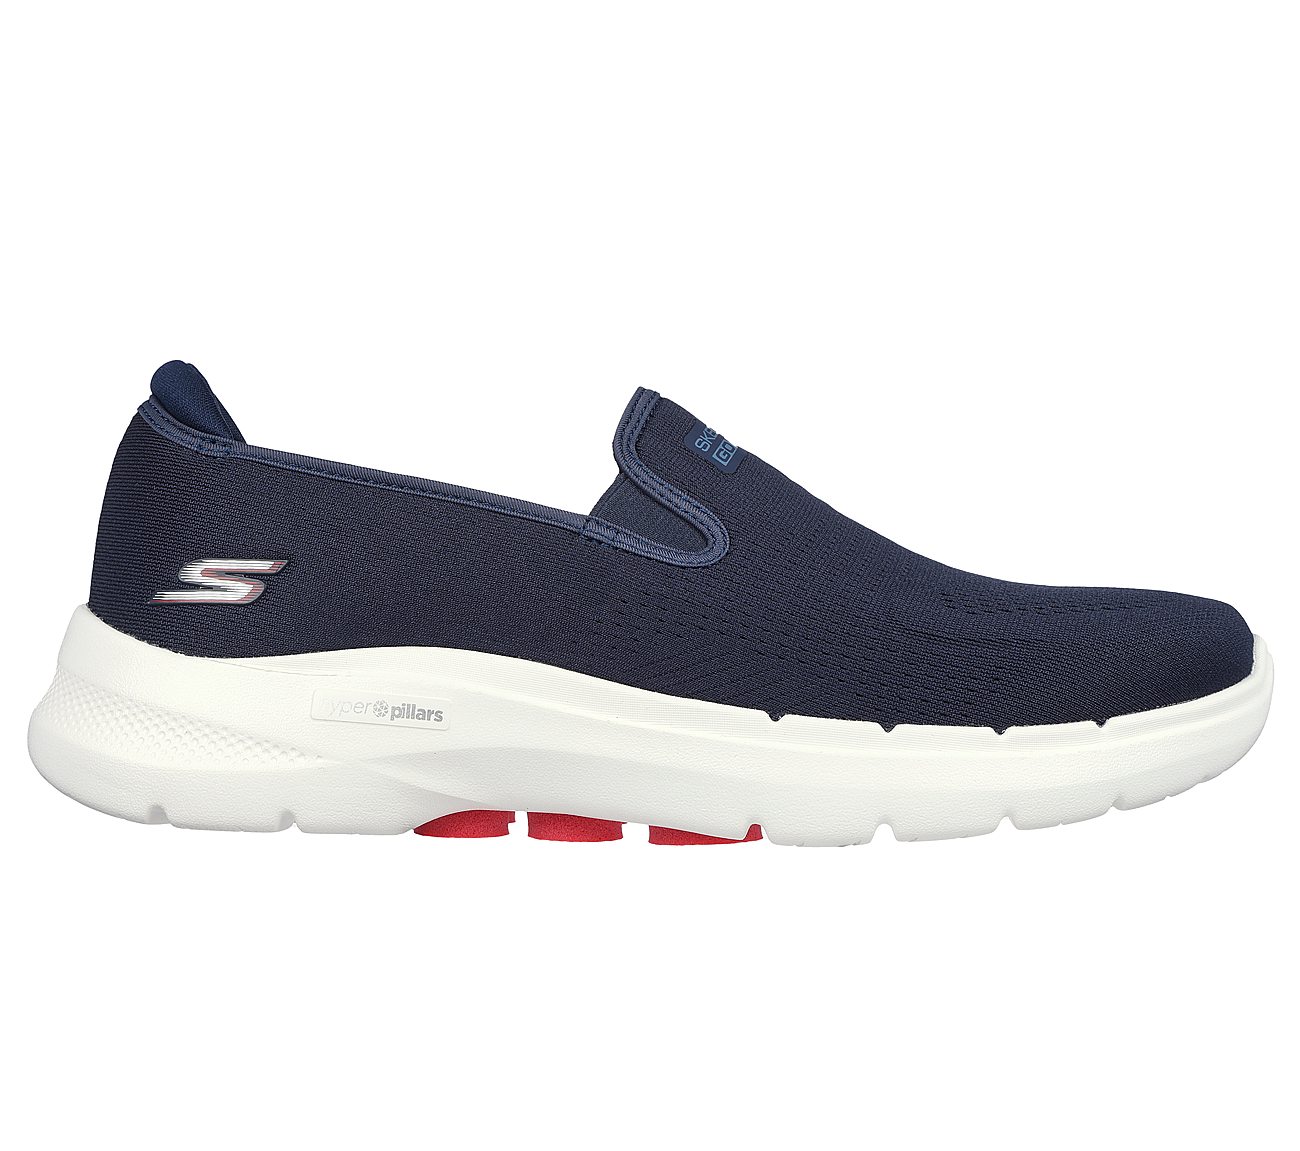 GO WALK 6 - PROCTOR, NAVY/RED Footwear Lateral View